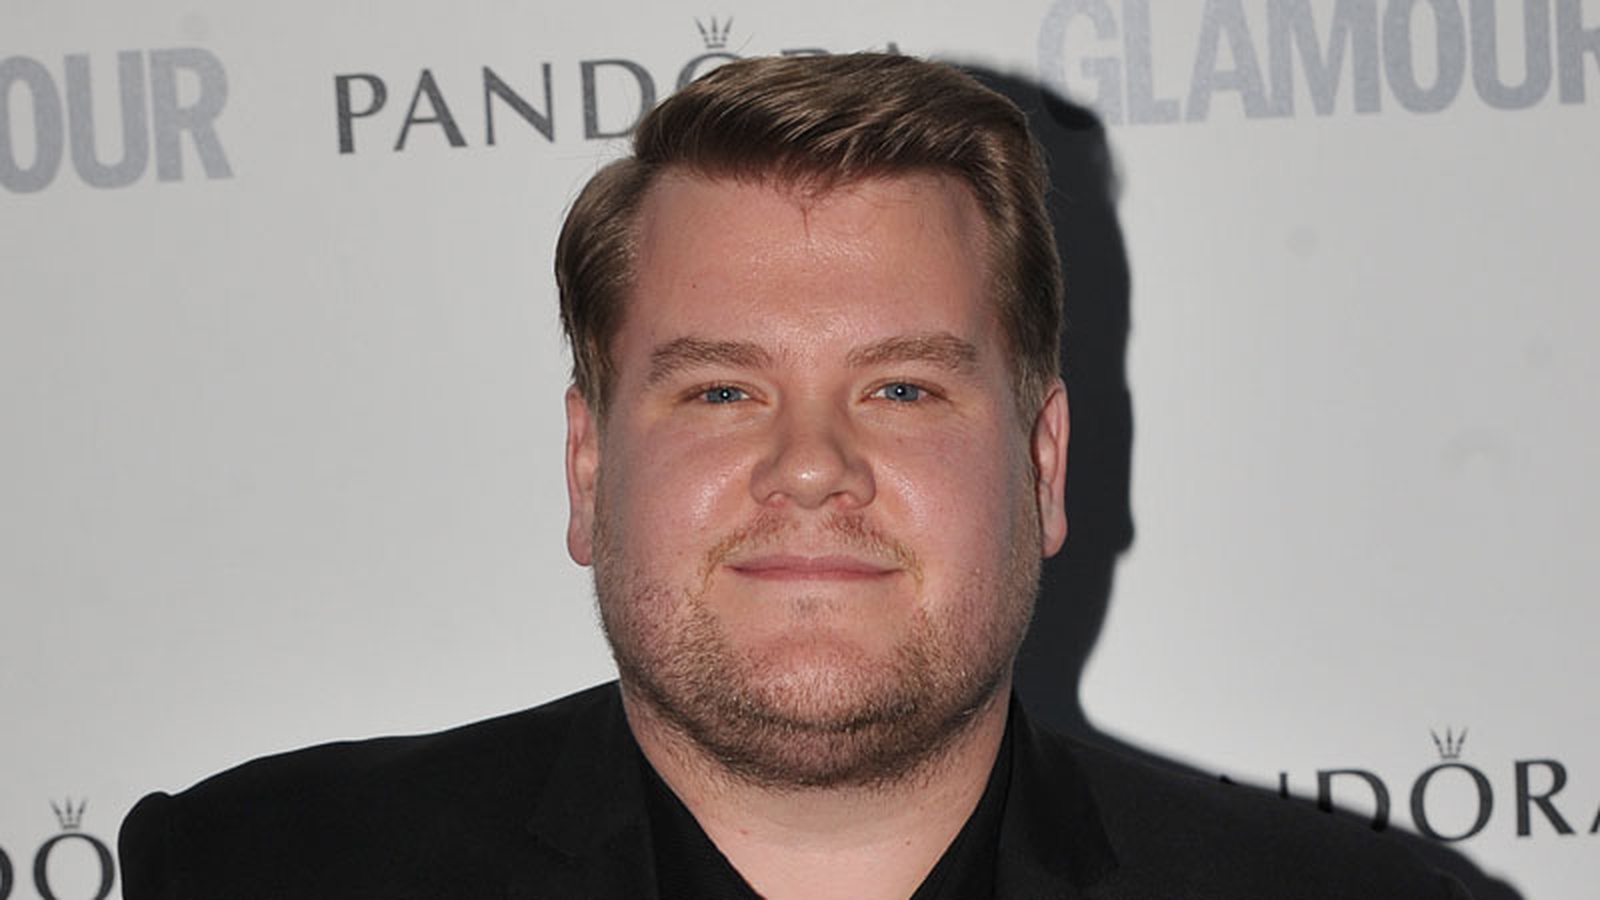 James Corden on his Doctor Who return